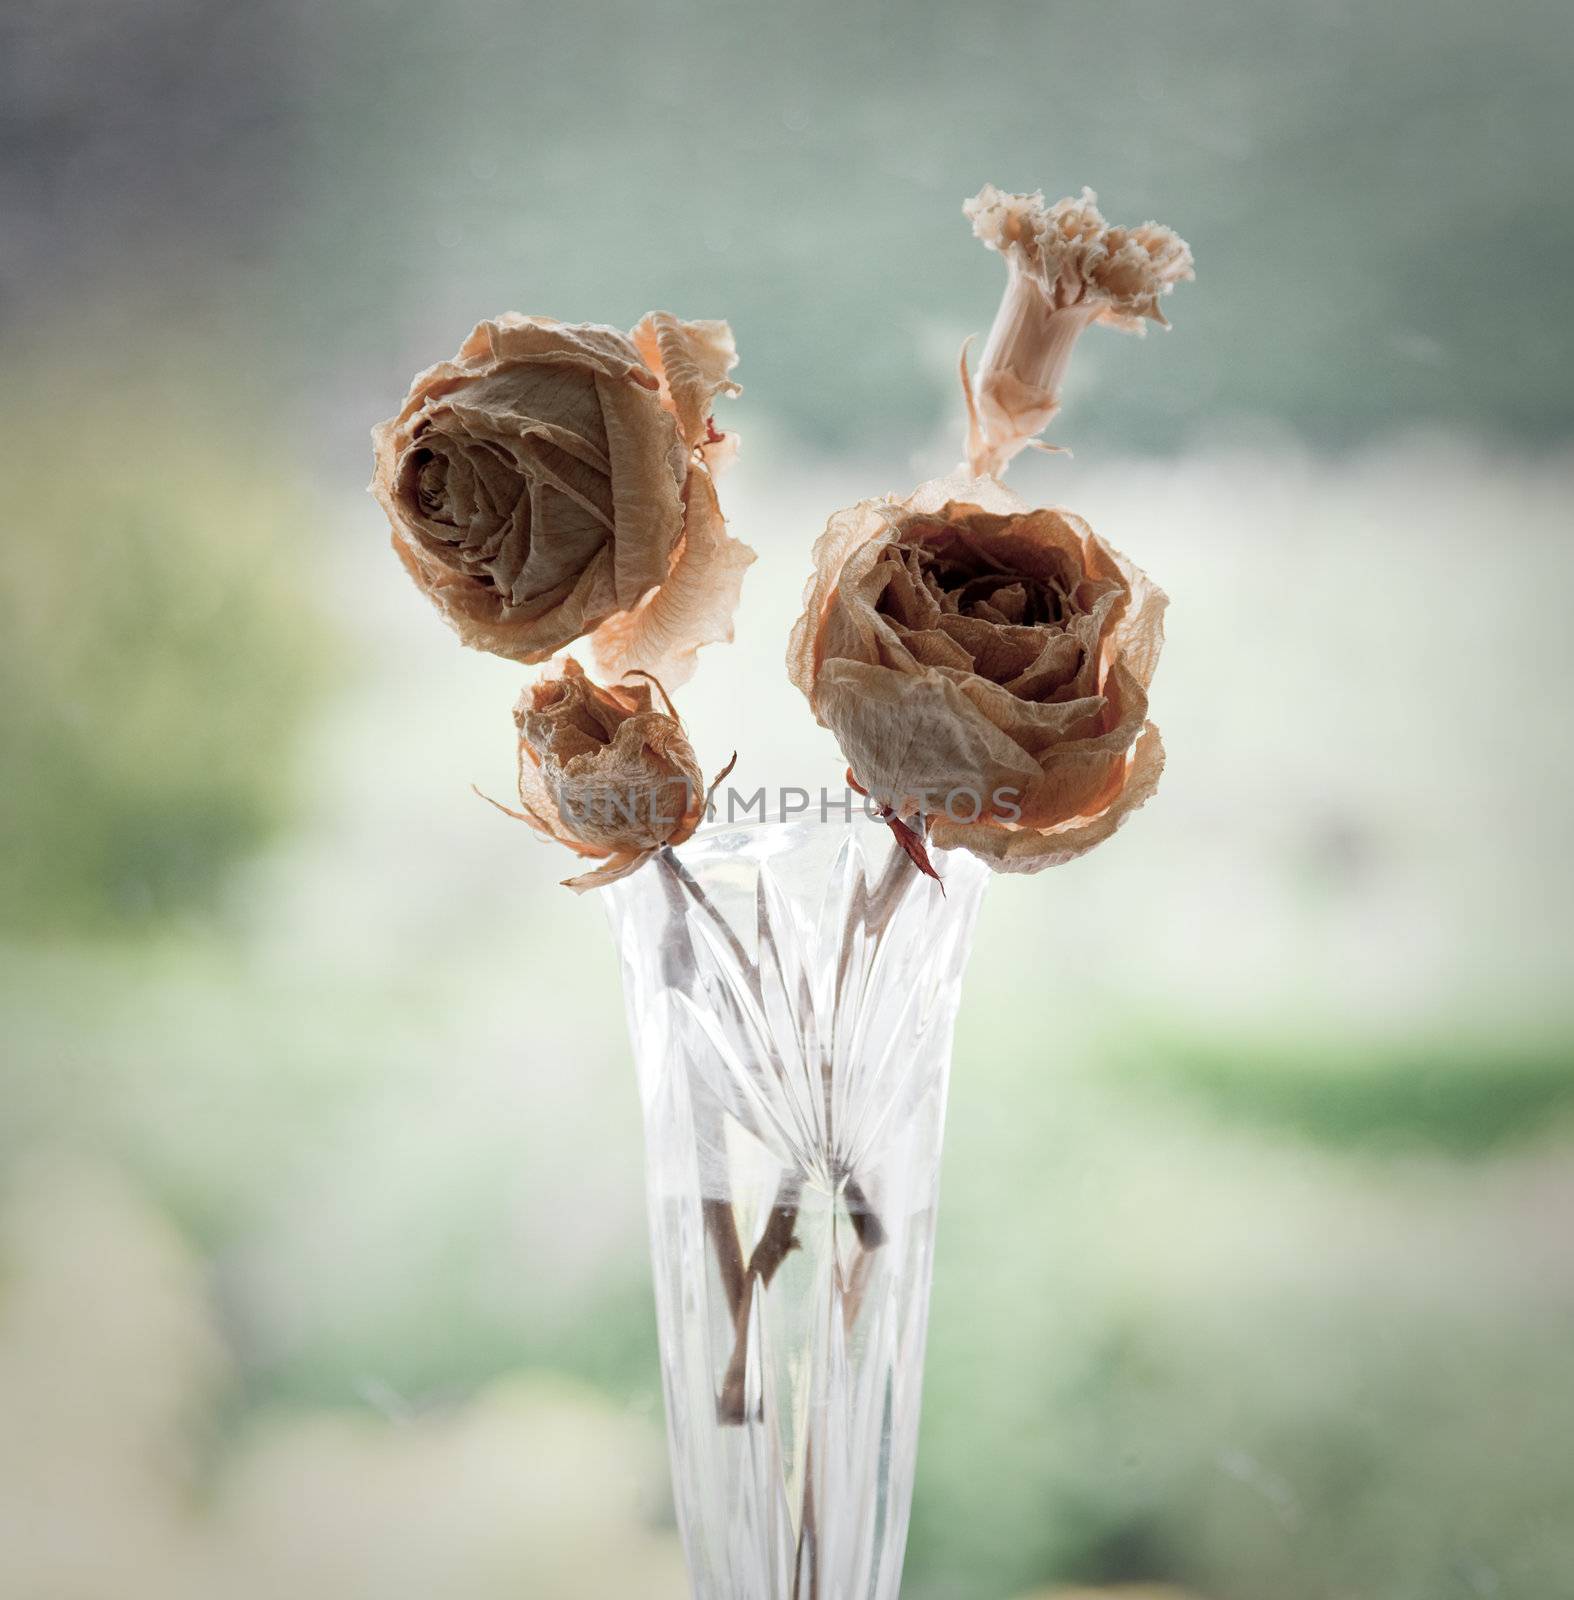 Old dried roses in a glass vase by steheap